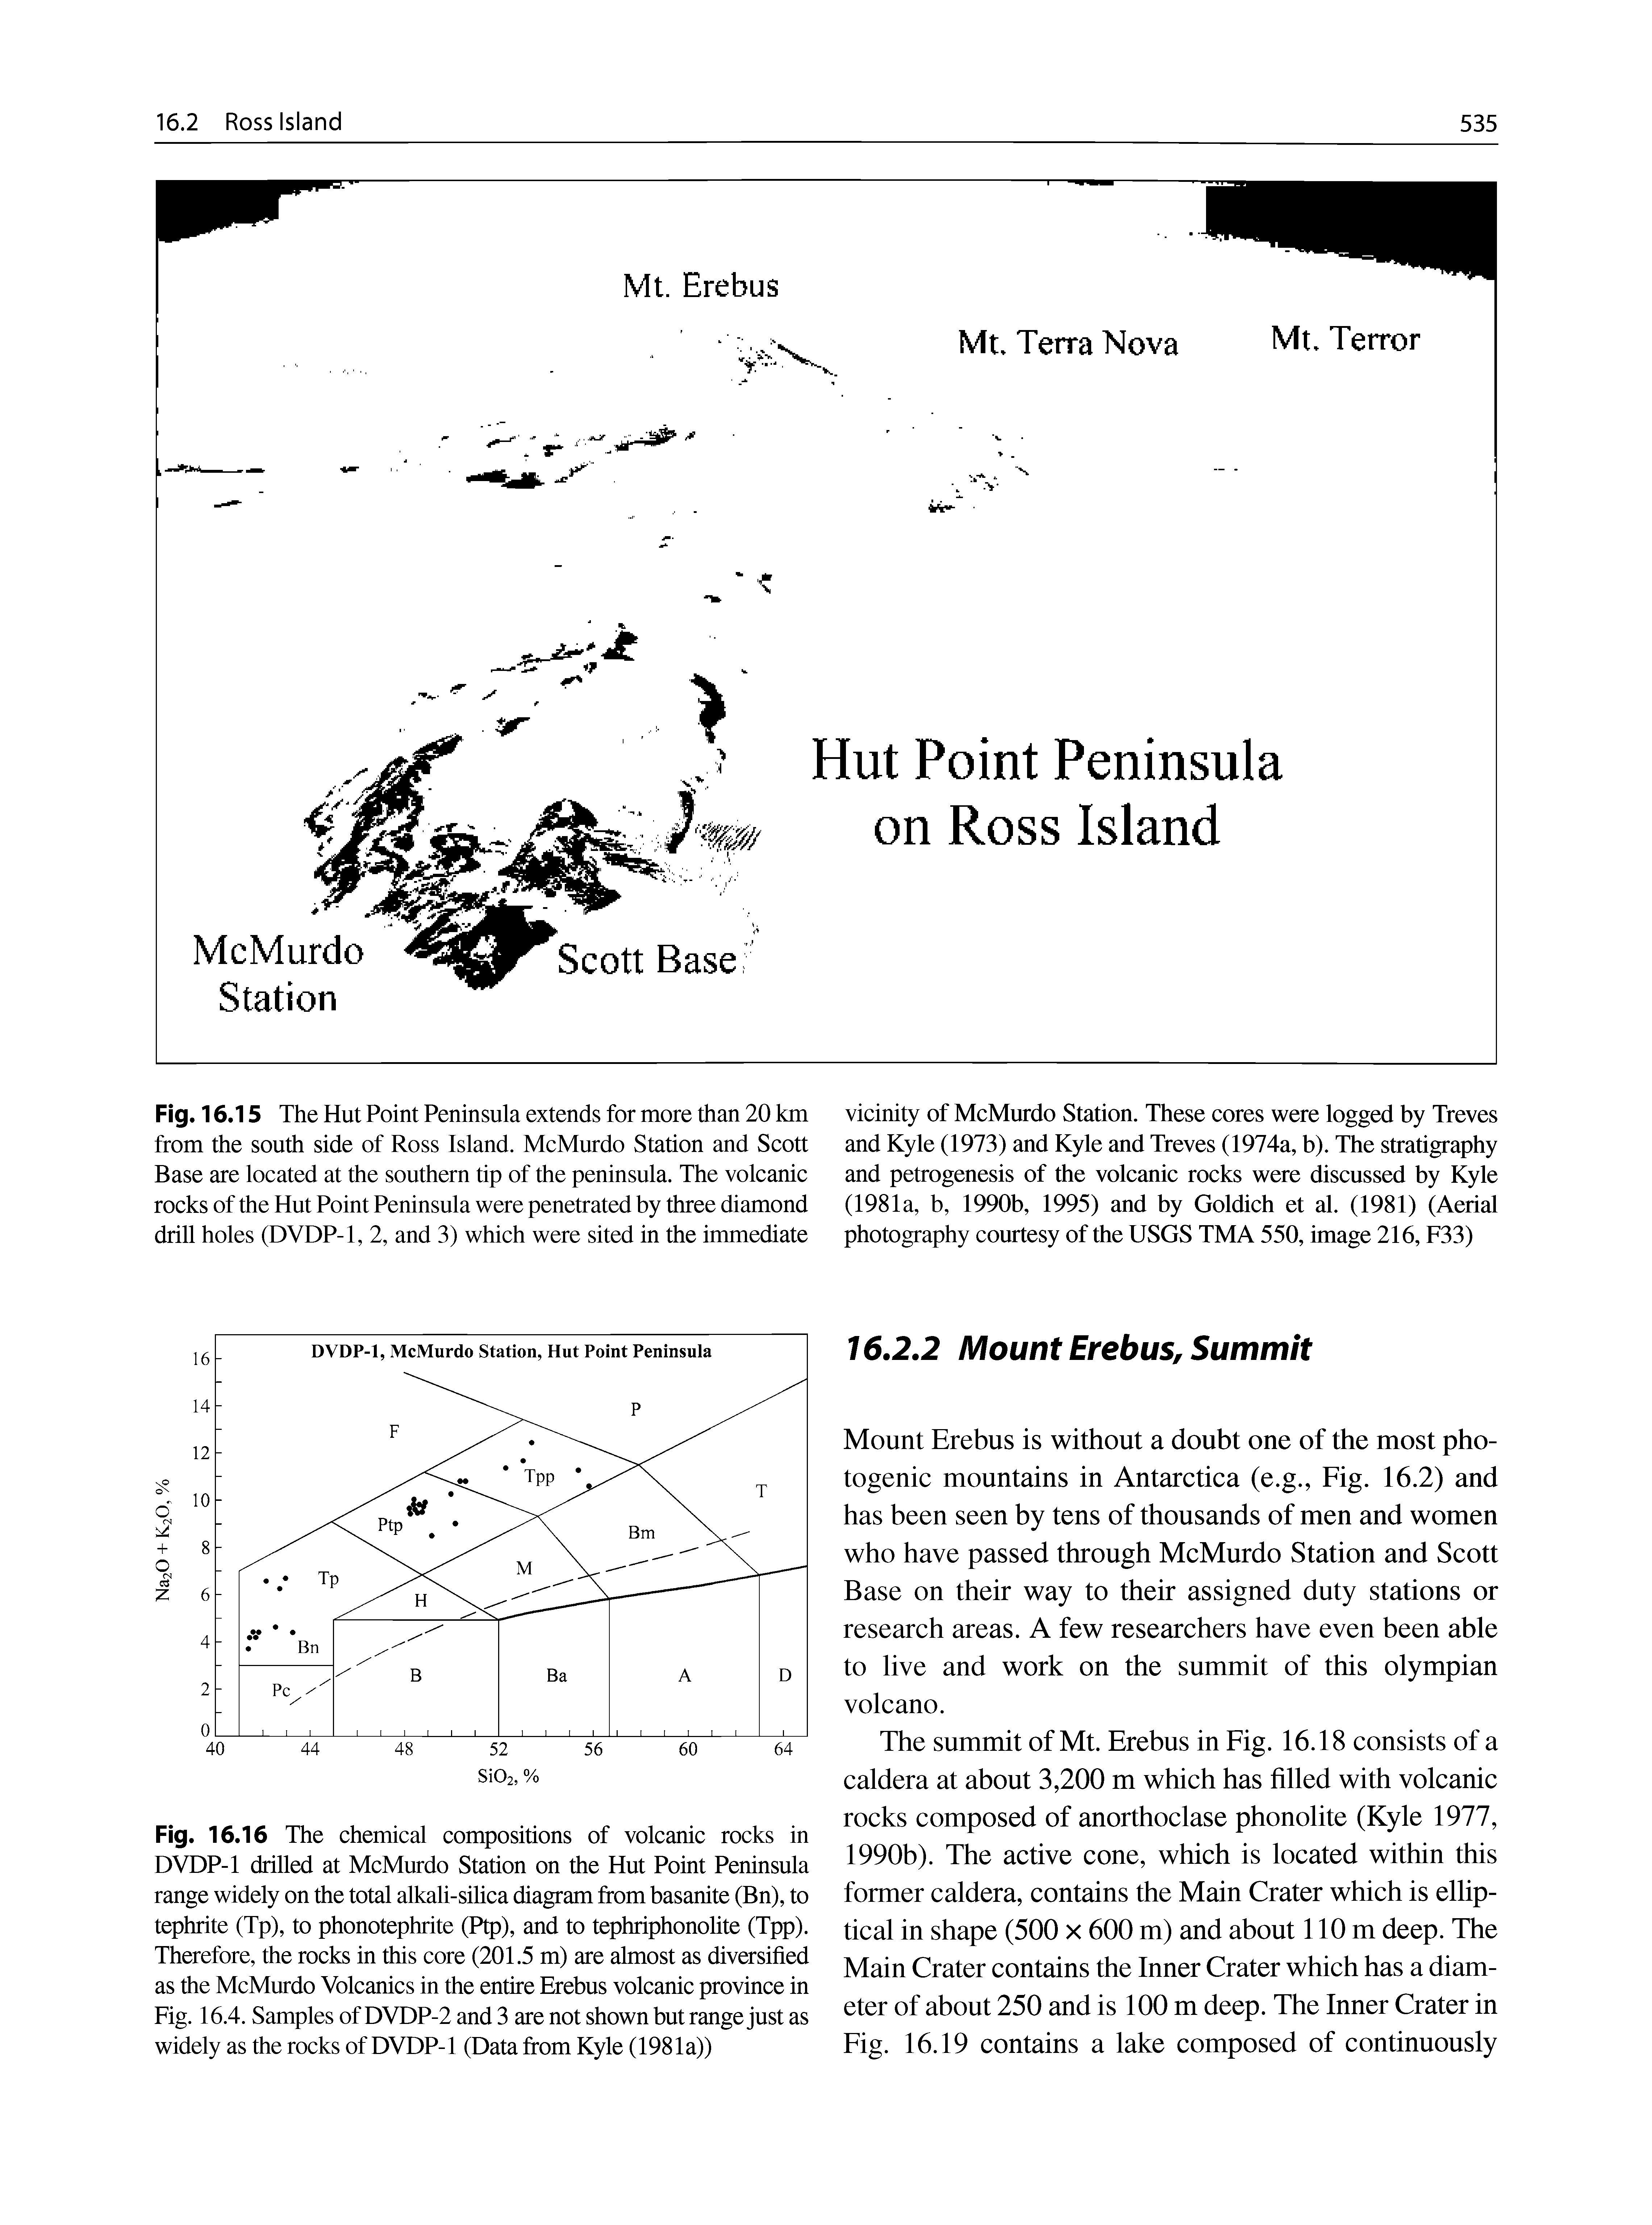 Fig. 16.16 The chemical compositions of volcanic rocks in DVDP-1 drilled at McMurdo Station on the Hut Point Peninsula range widely on the total alkali-silica diagram from basanite (Bn), to tephrite (Tp), to phonotephrite (Ptp), and to tephriphonolite (Tpp). Therefore, the rocks in this core (201.5 m) are almost as diversified as the McMurdo Volcanics in the entire Erebus volcanic province in Fig. 16.4. Samples of DVDP-2 and 3 are not shown but range just as widely as the rocks of DVDP-1 (Data from Kyle (1981a))...